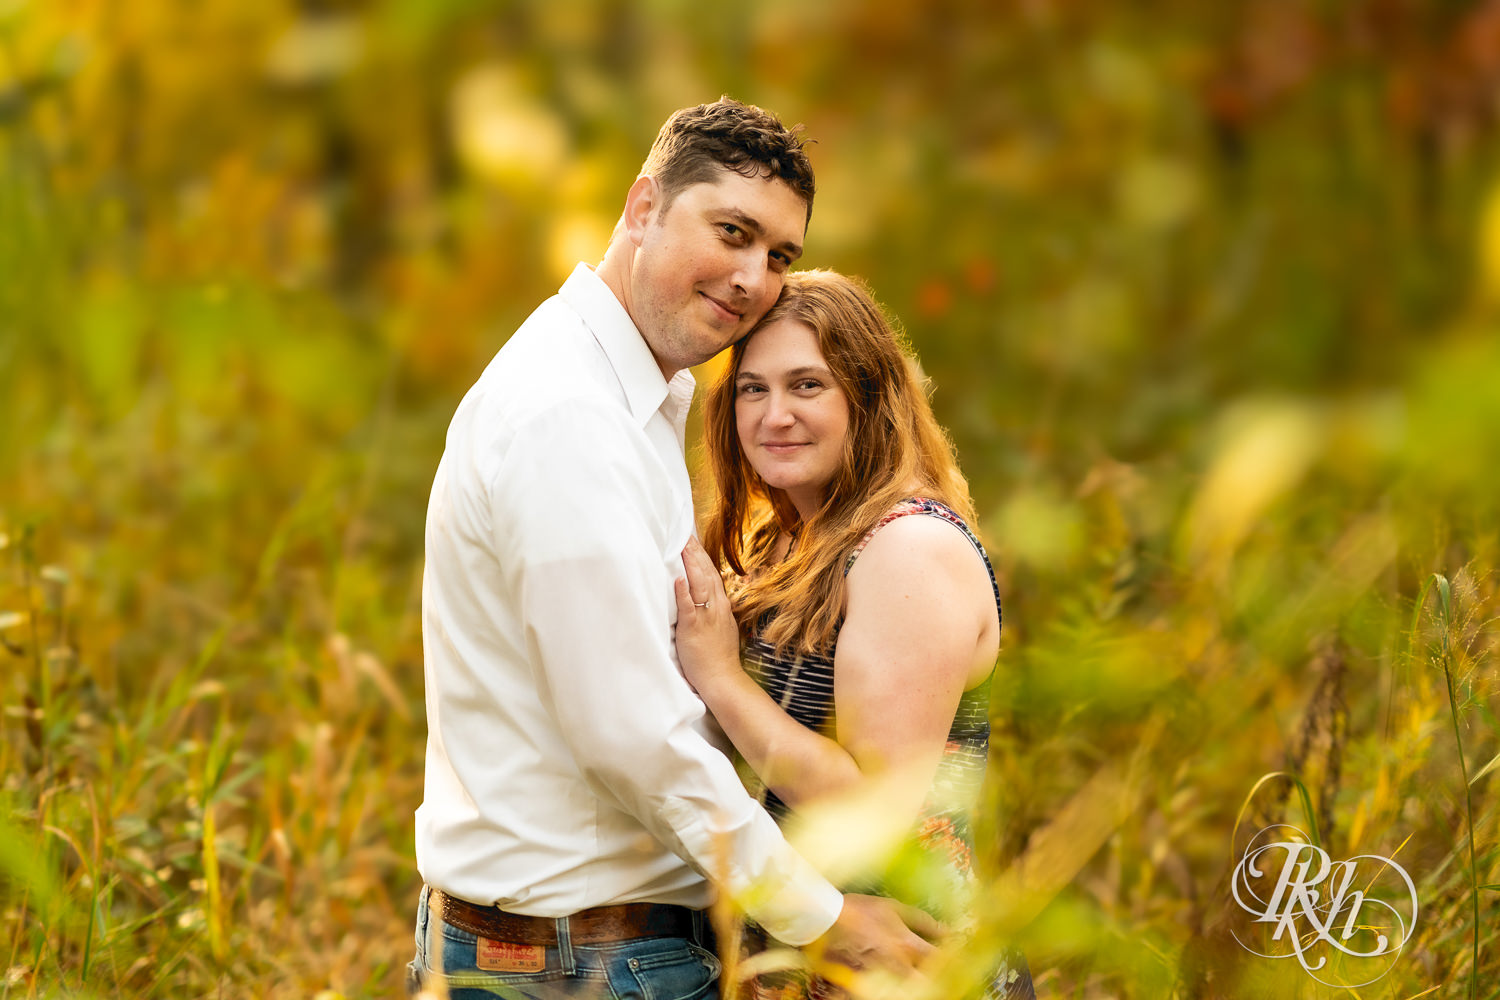 Man in hat and jeans and woman in dress smile during fall engagement photos at Lebanon Hills Regional Park in Eagan, Minnesota.